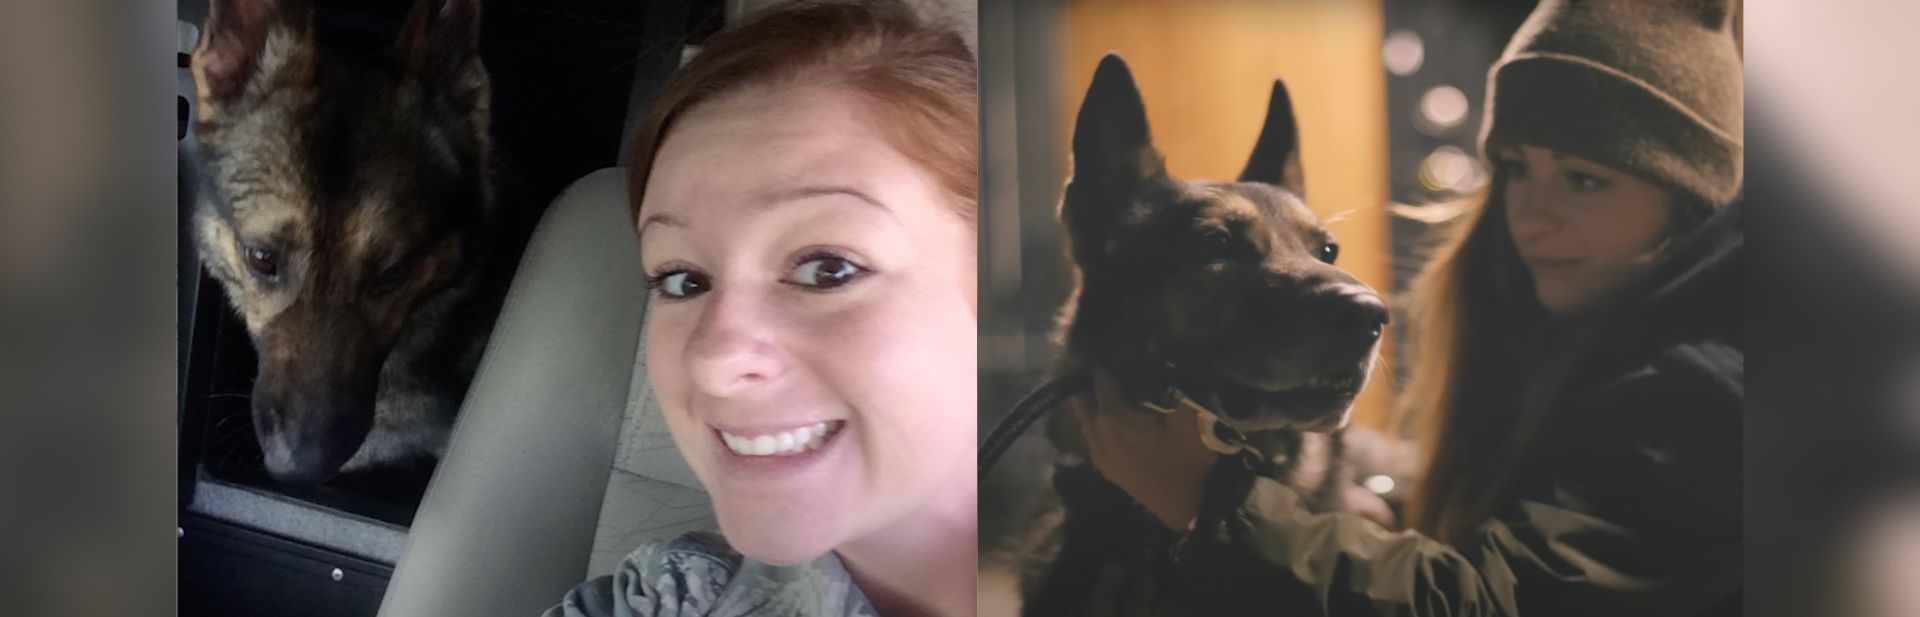 No Soldier Left Behind: How One Military Dog Made It Home to His Human Partner in A Heartwarming Surprise